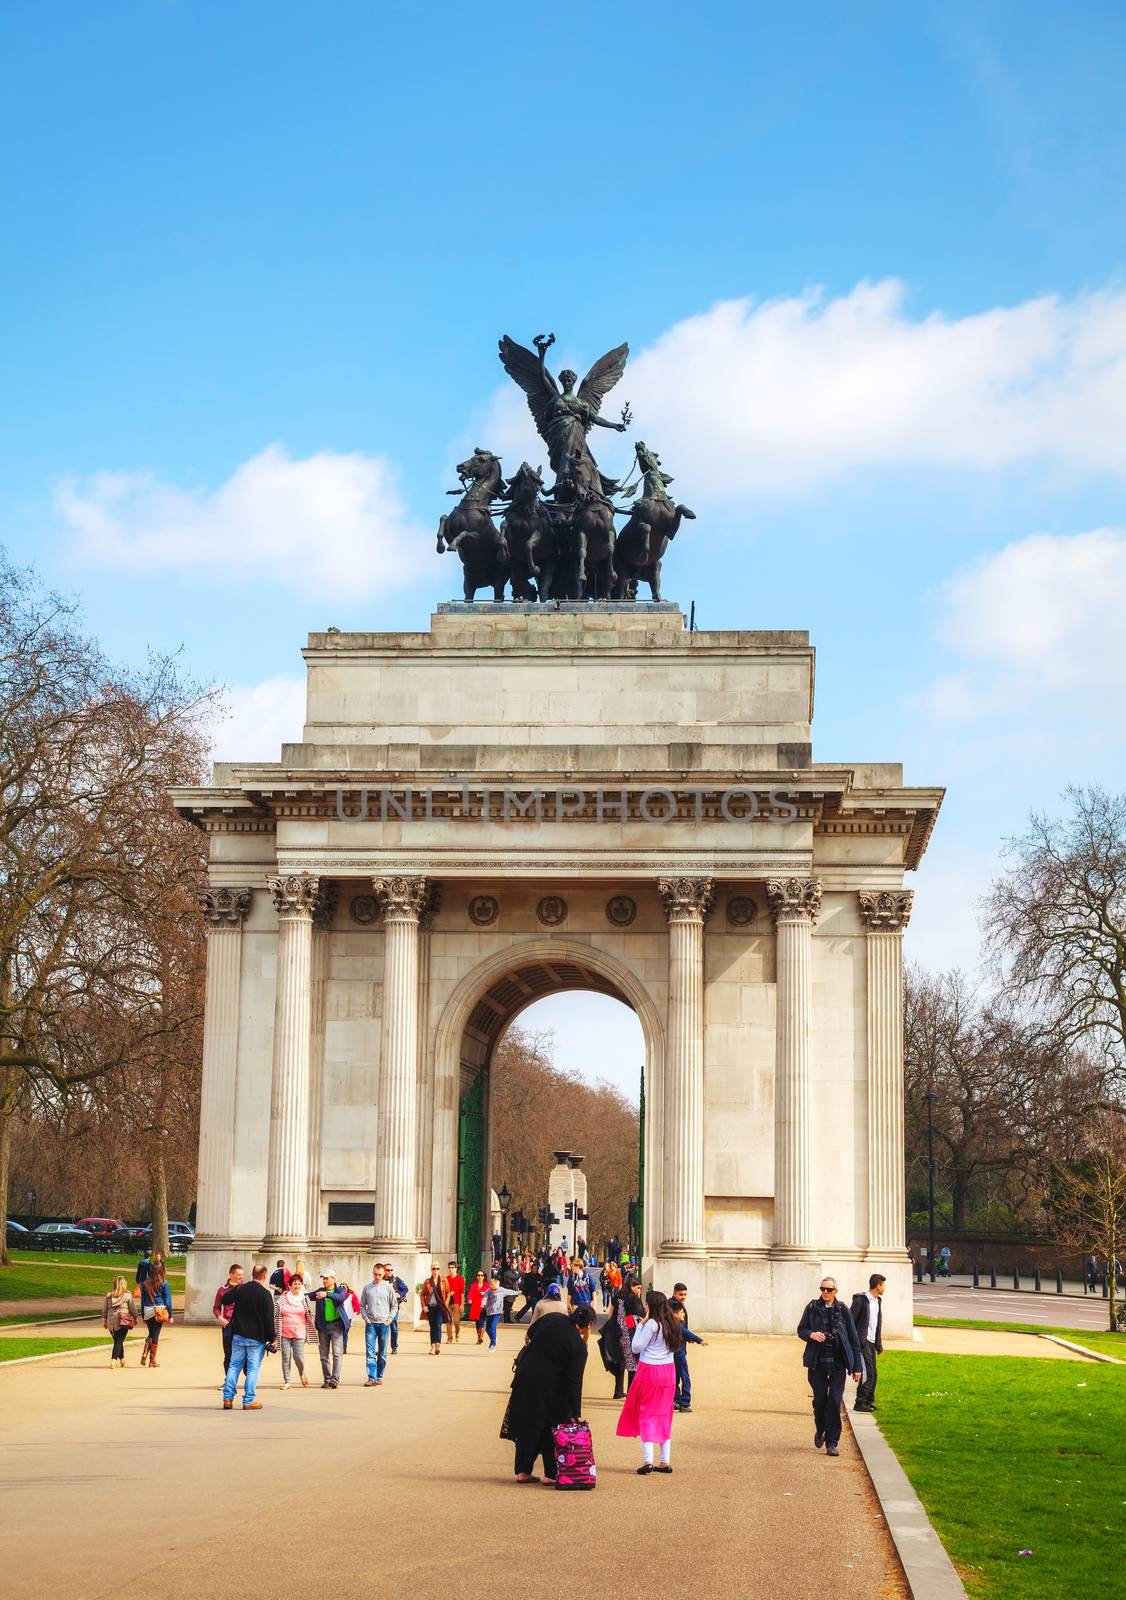 Wellington Arch monument in London, UK by AndreyKr